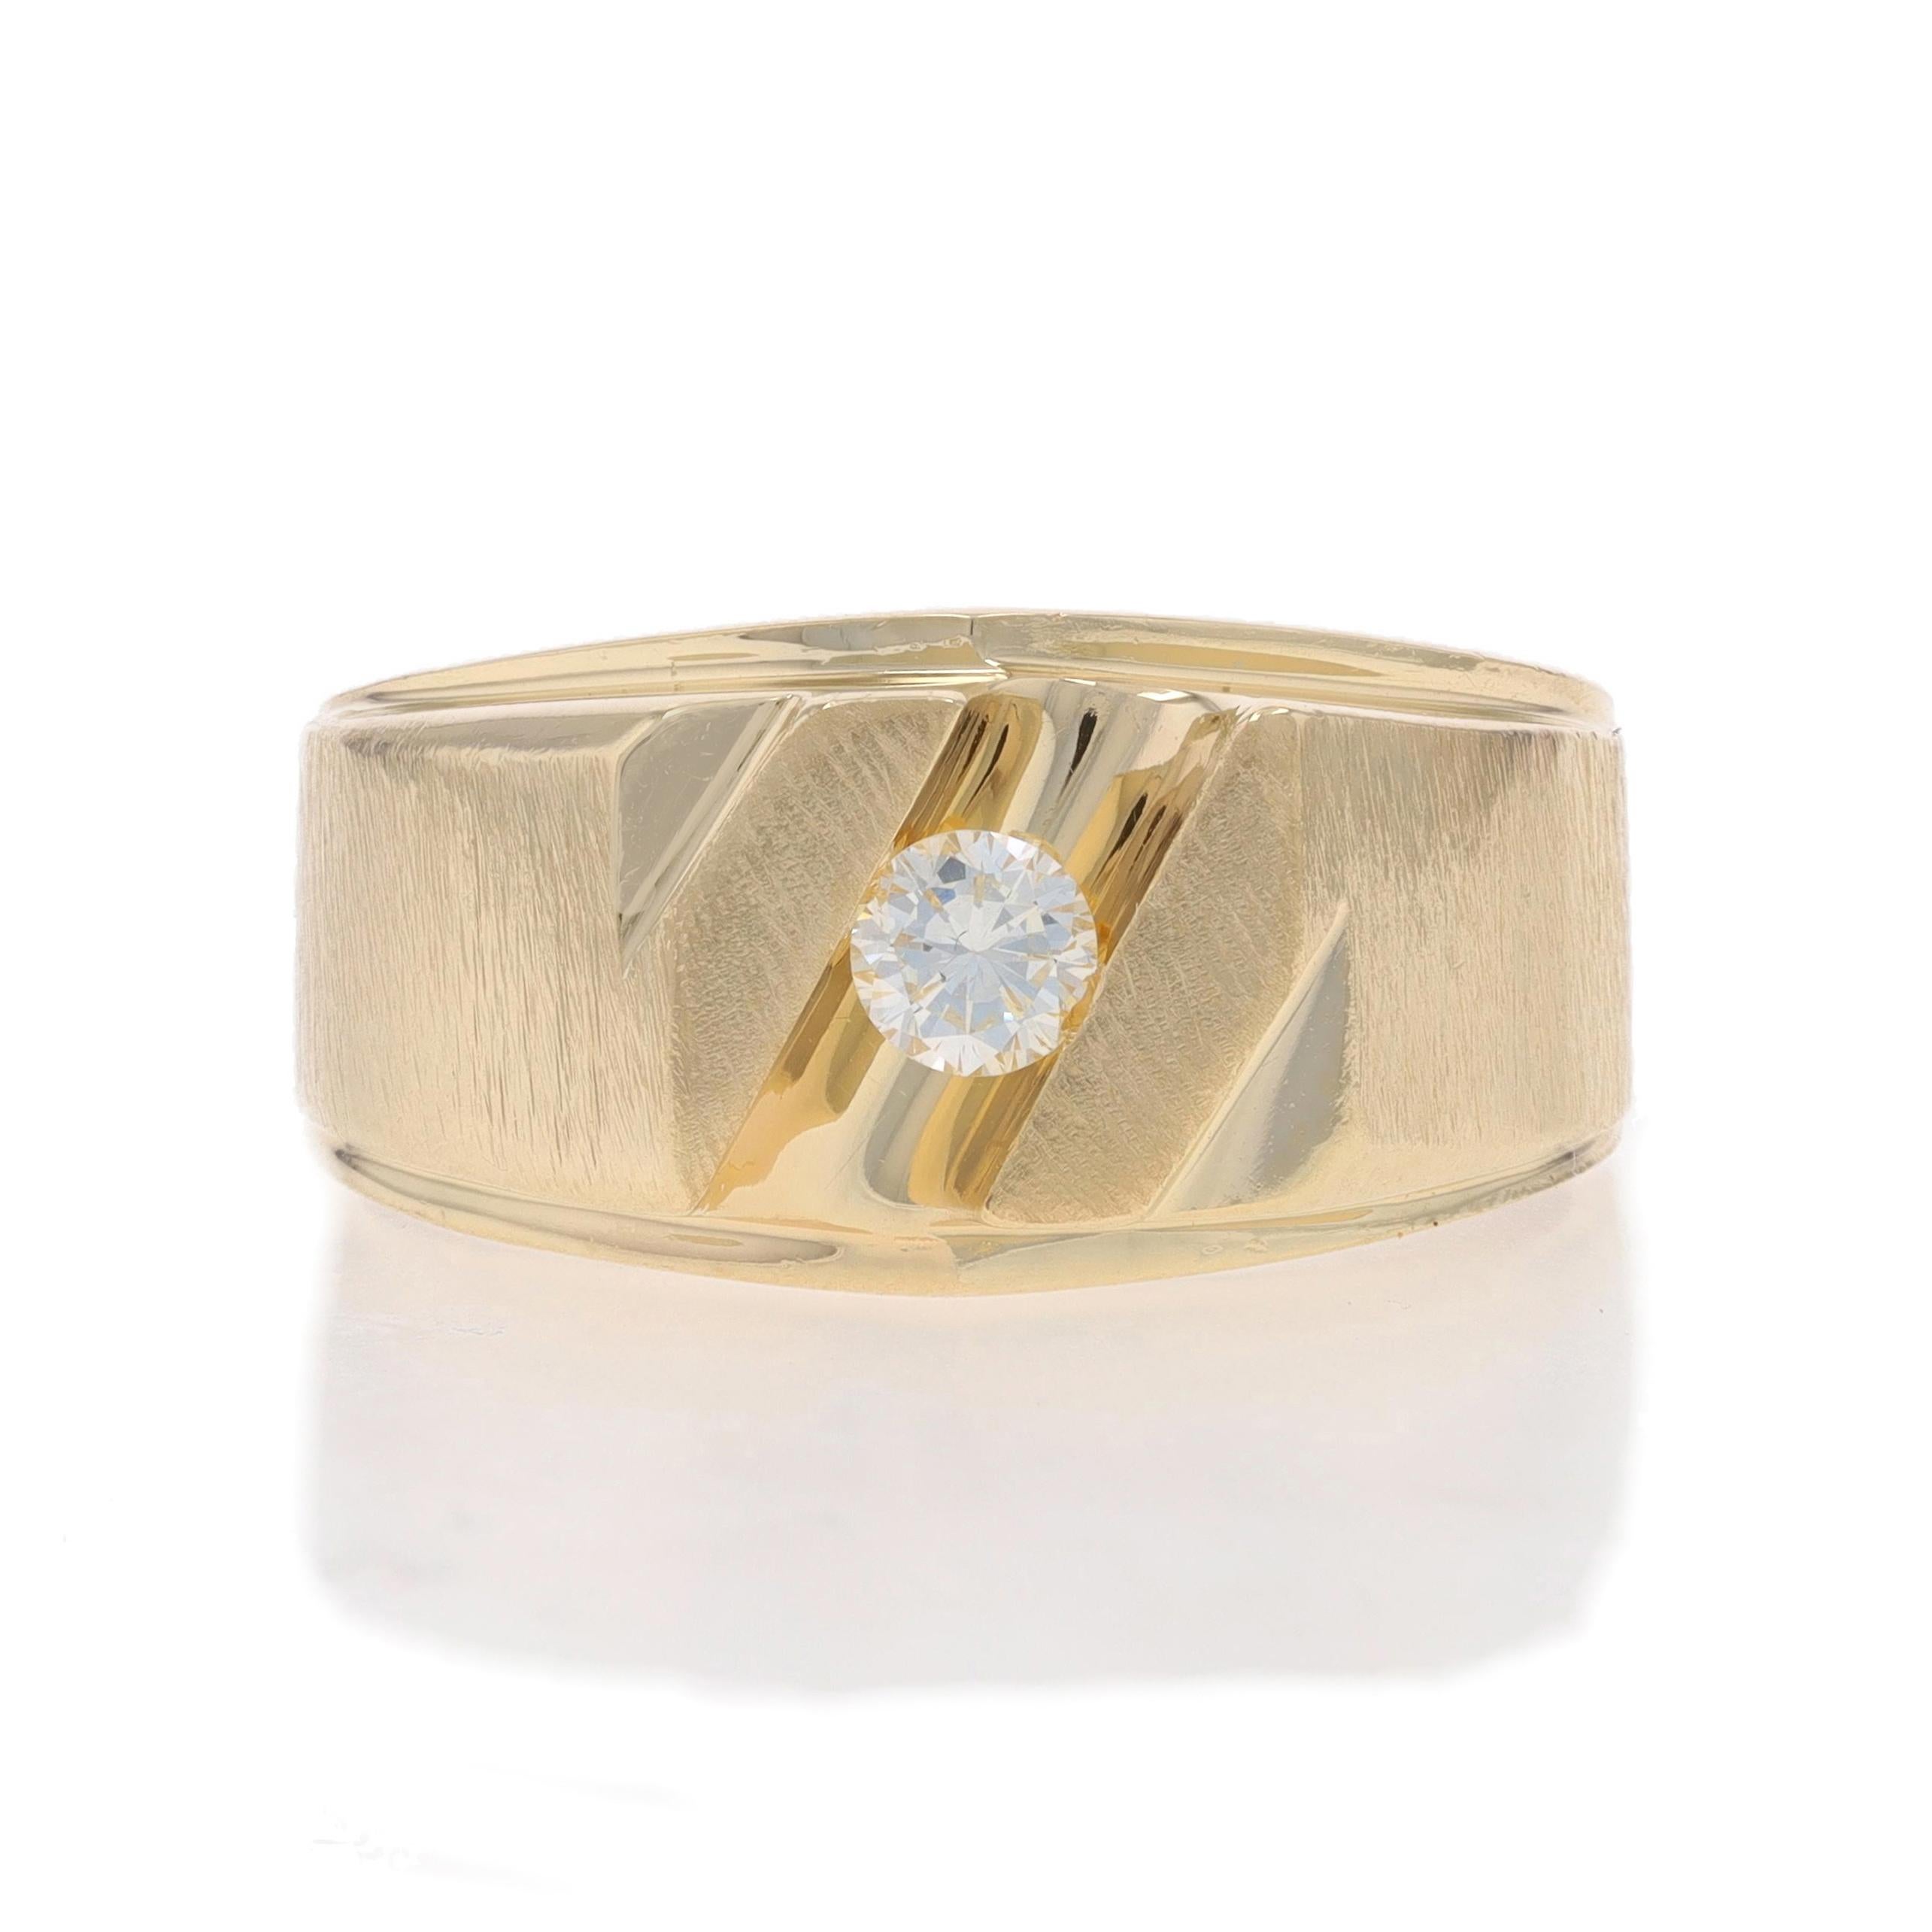 Size: 11
Sizing Fee: Up 2 1/2 sizes for $60 or Down 1 1/2 sizes for $40

Metal Content: 14k Yellow Gold

Stone Information

Natural Diamond
Carat(s): .25ct
Cut: Round Brilliant
Color: J
Clarity: VS1

Total Carats: .25ct

Style: Solitaire
Features: